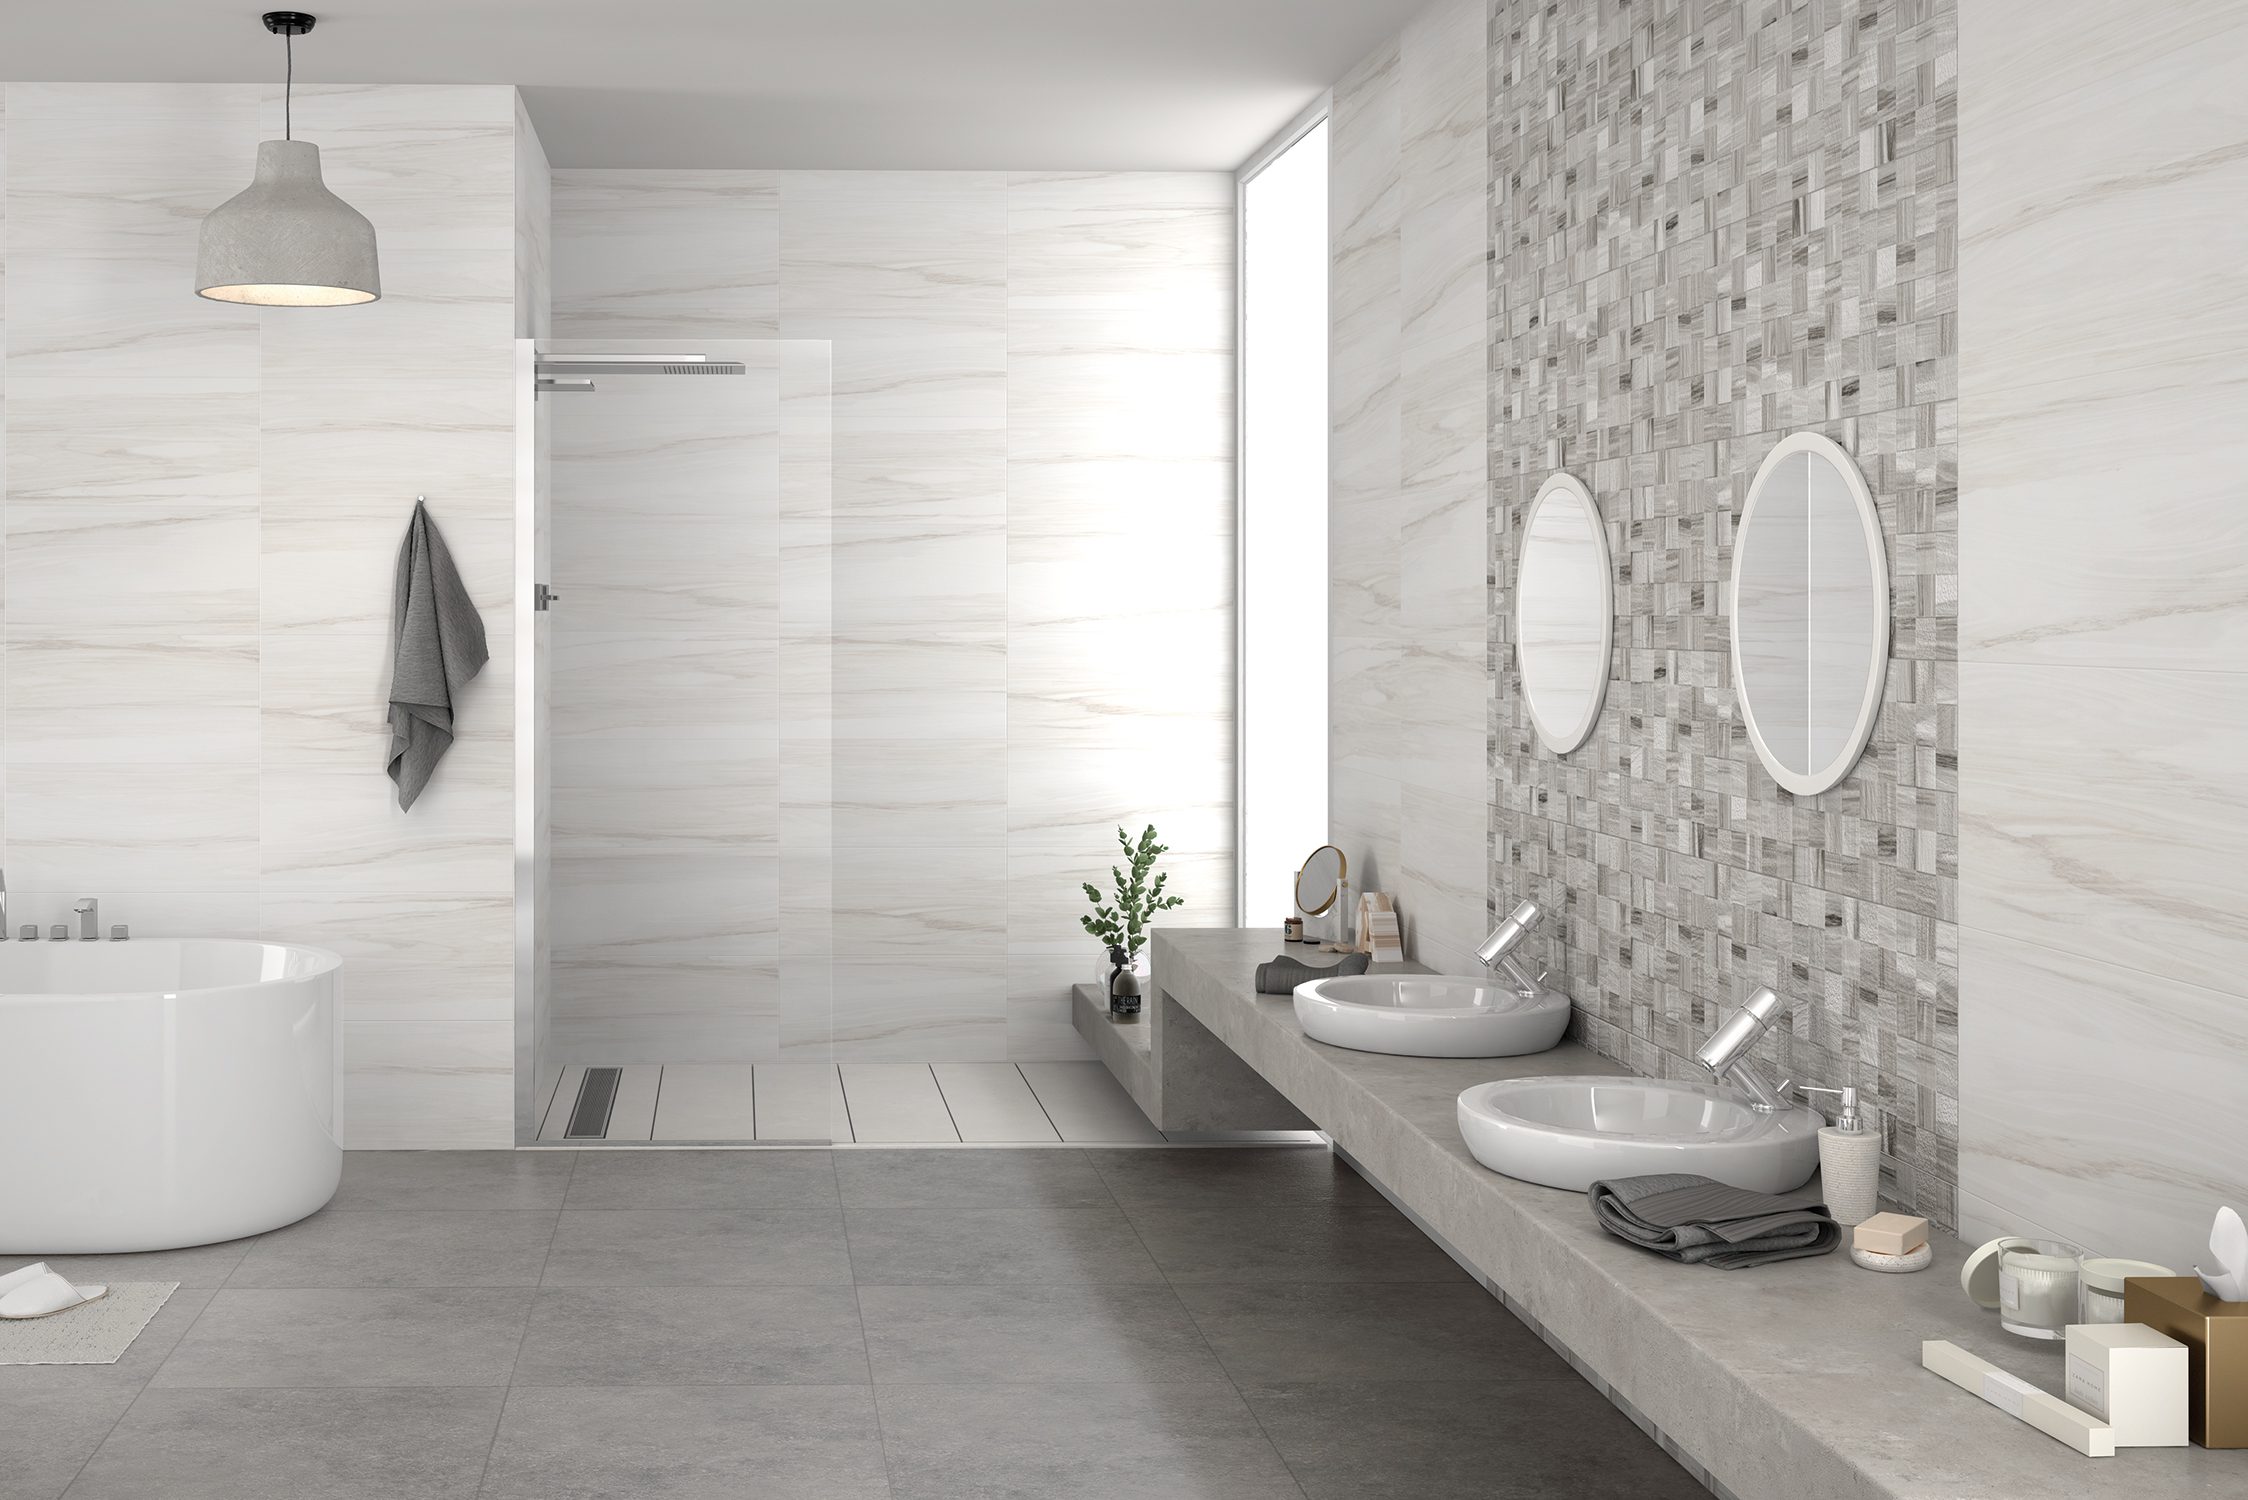 Tribeca Blanco Whitewashed Wood Look Tile  Online Tile Store with Free  Shipping on Qualifying Orders